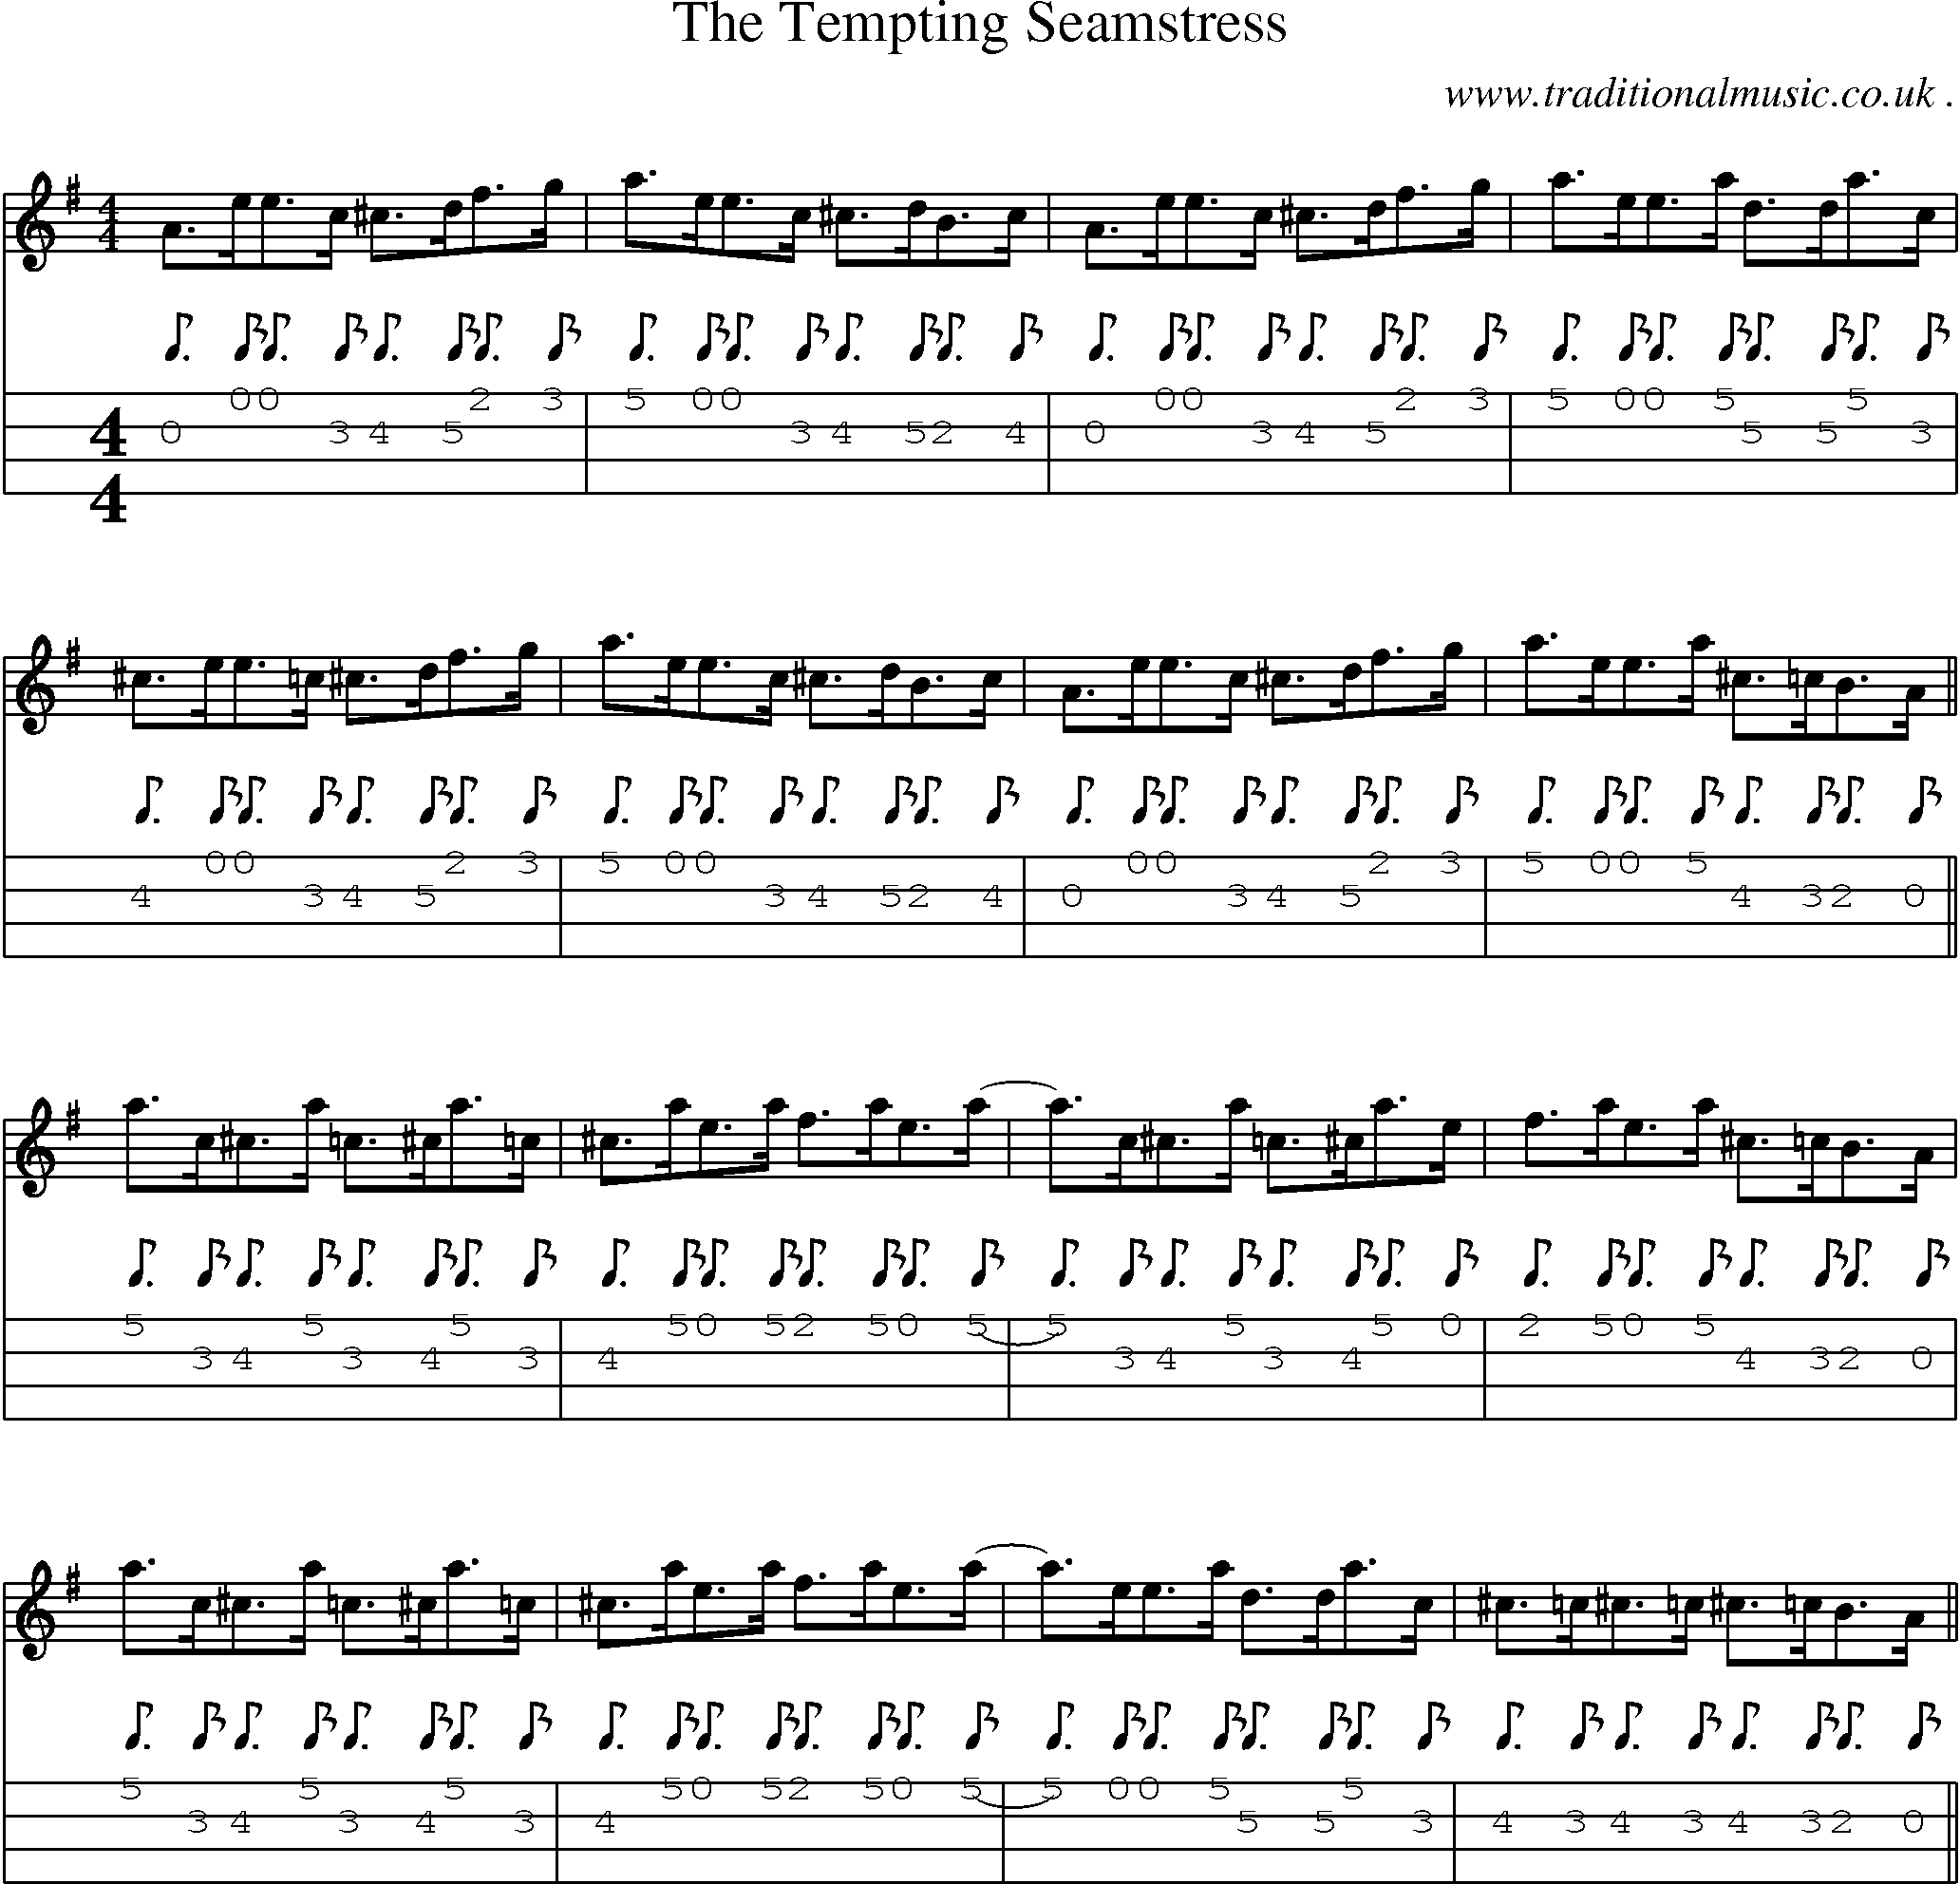 Sheet-Music and Mandolin Tabs for The Tempting Seamstress